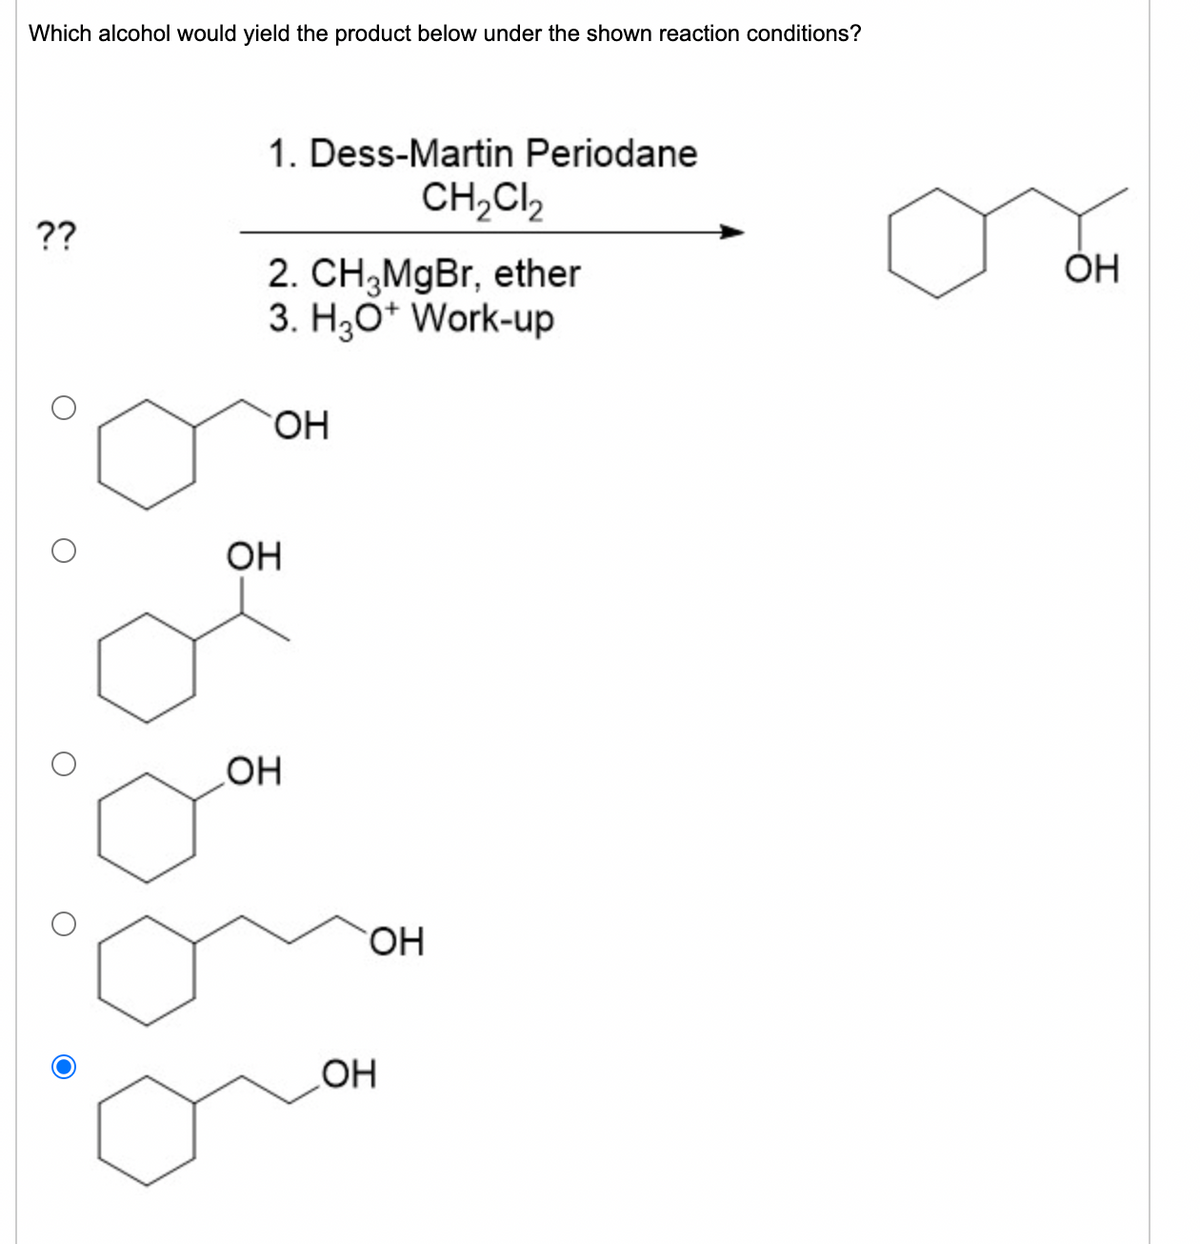 Which alcohol would yield the product below under the shown reaction conditions?
1. Dess-Martin Periodane
CH,Cl,
??
ОН
2. CH¿MgBr, ether
3. H3Ö* Work-up
HO.
OH
HO.
HO
